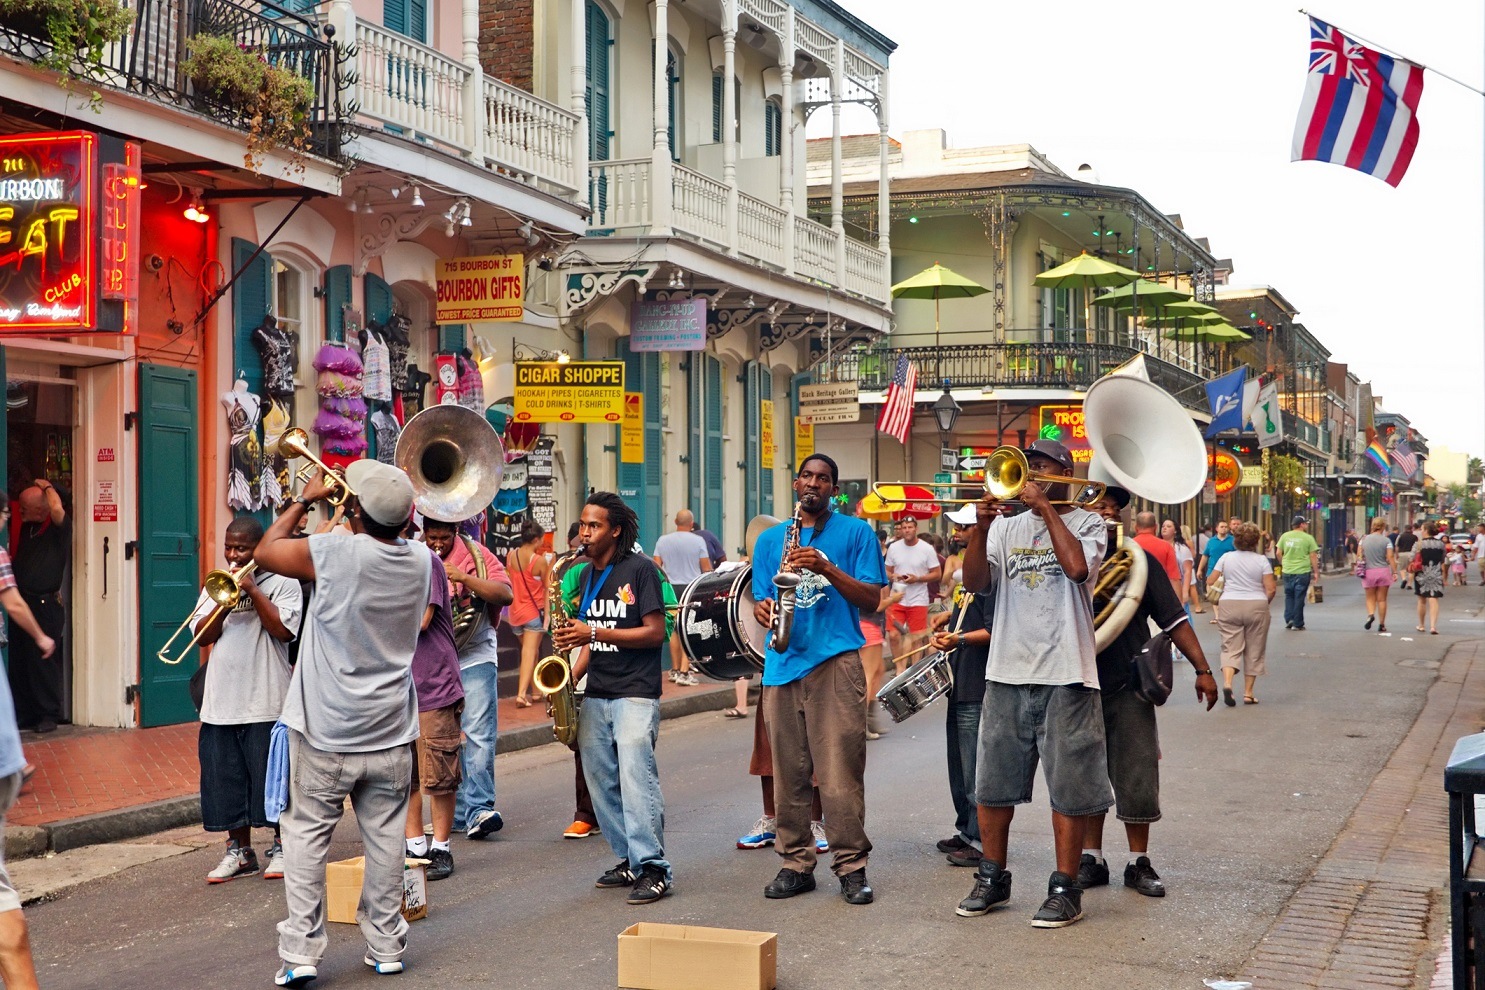 In New Orleans on Bourbon St. on August 7, 2013 a jazz band plays jazz melodies in the street for donations from the tourists and locals passing by on this hot summer evening